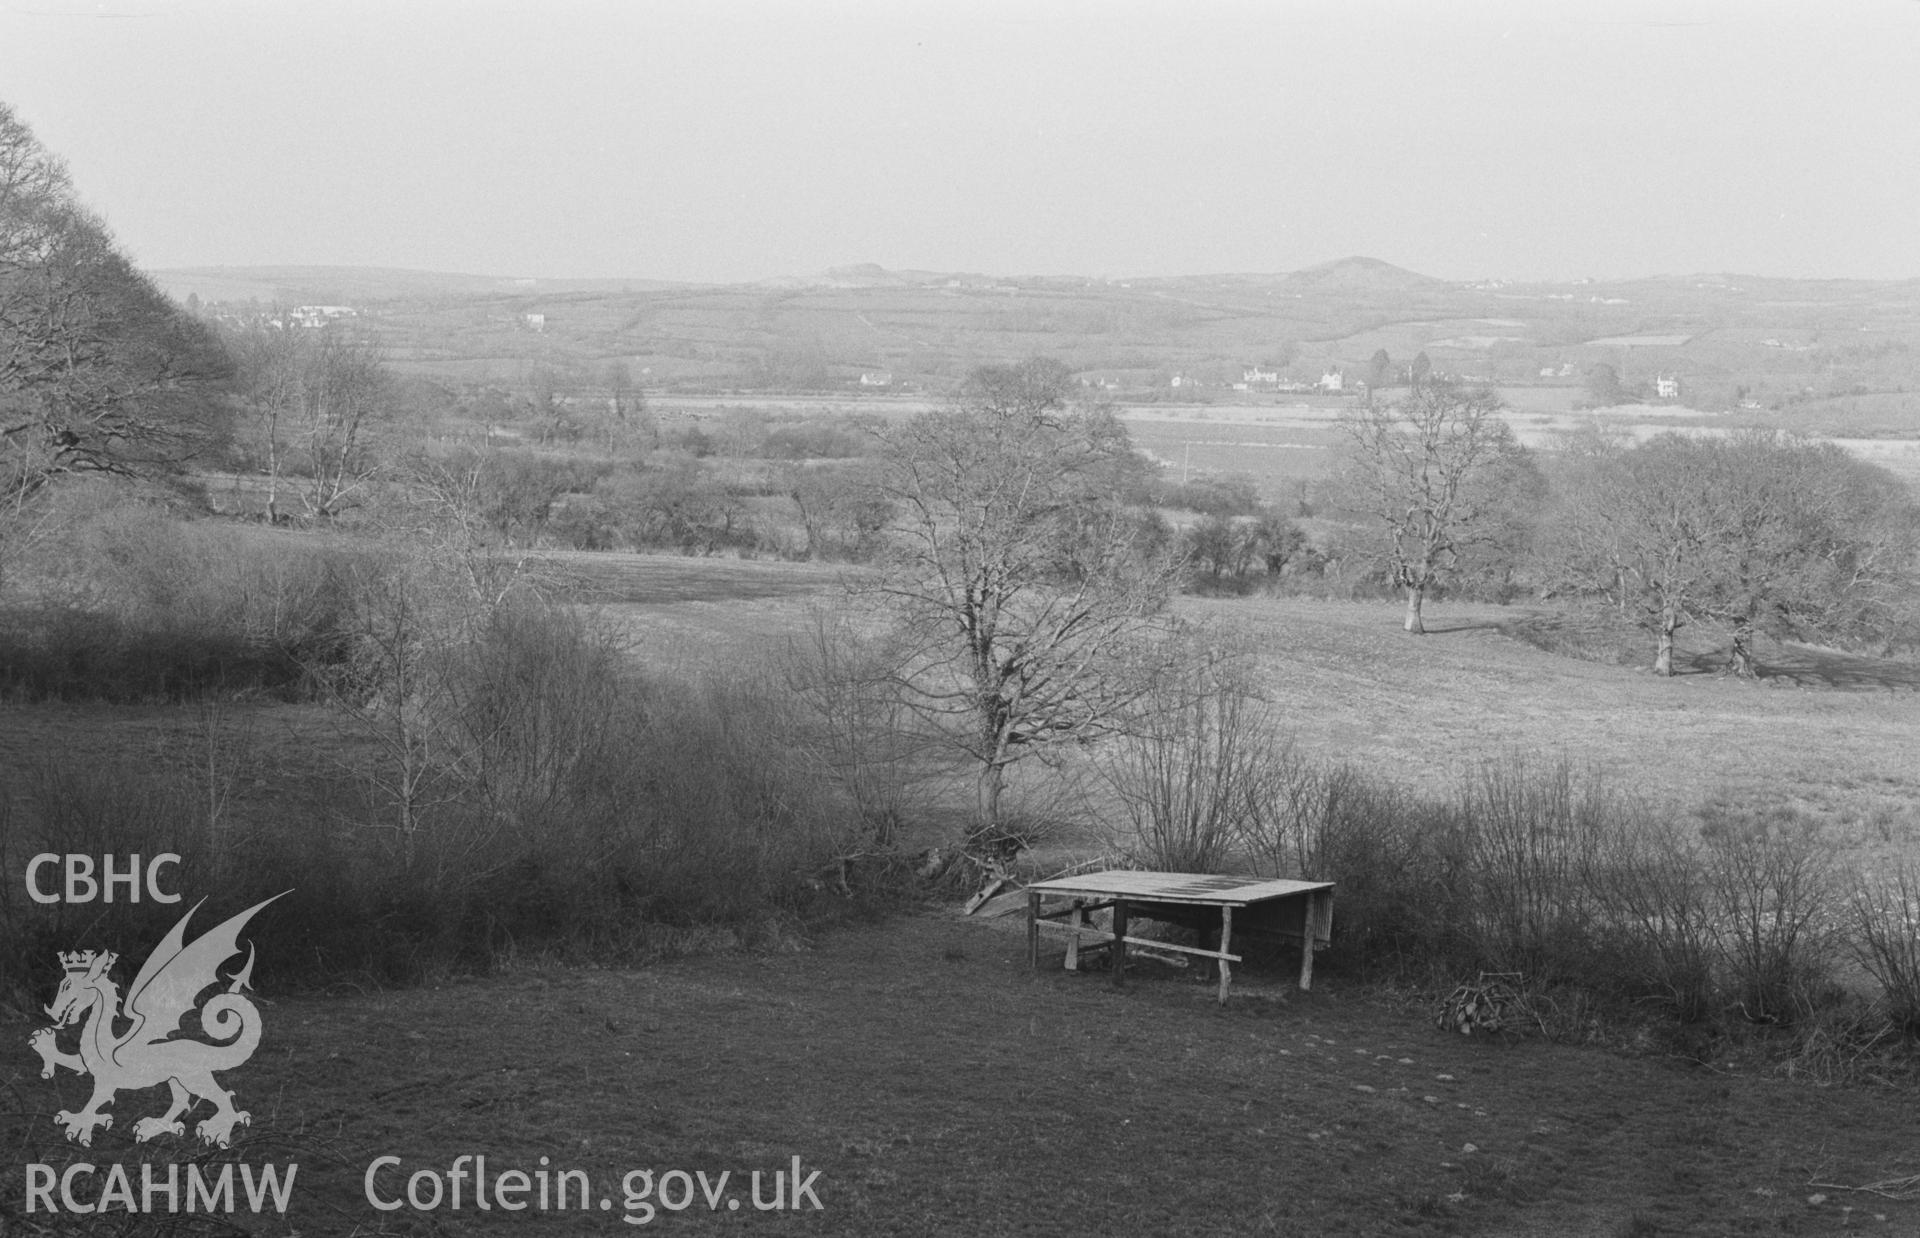 Digital copy of a black and white negative showing view from the A478 main road at Dolau, looking across the Teifi, Bancywarren hill in distance on right. Photographed by Arthur O. Chater in April 1968. (Looking north north east from Grid Reference SN 180 444).